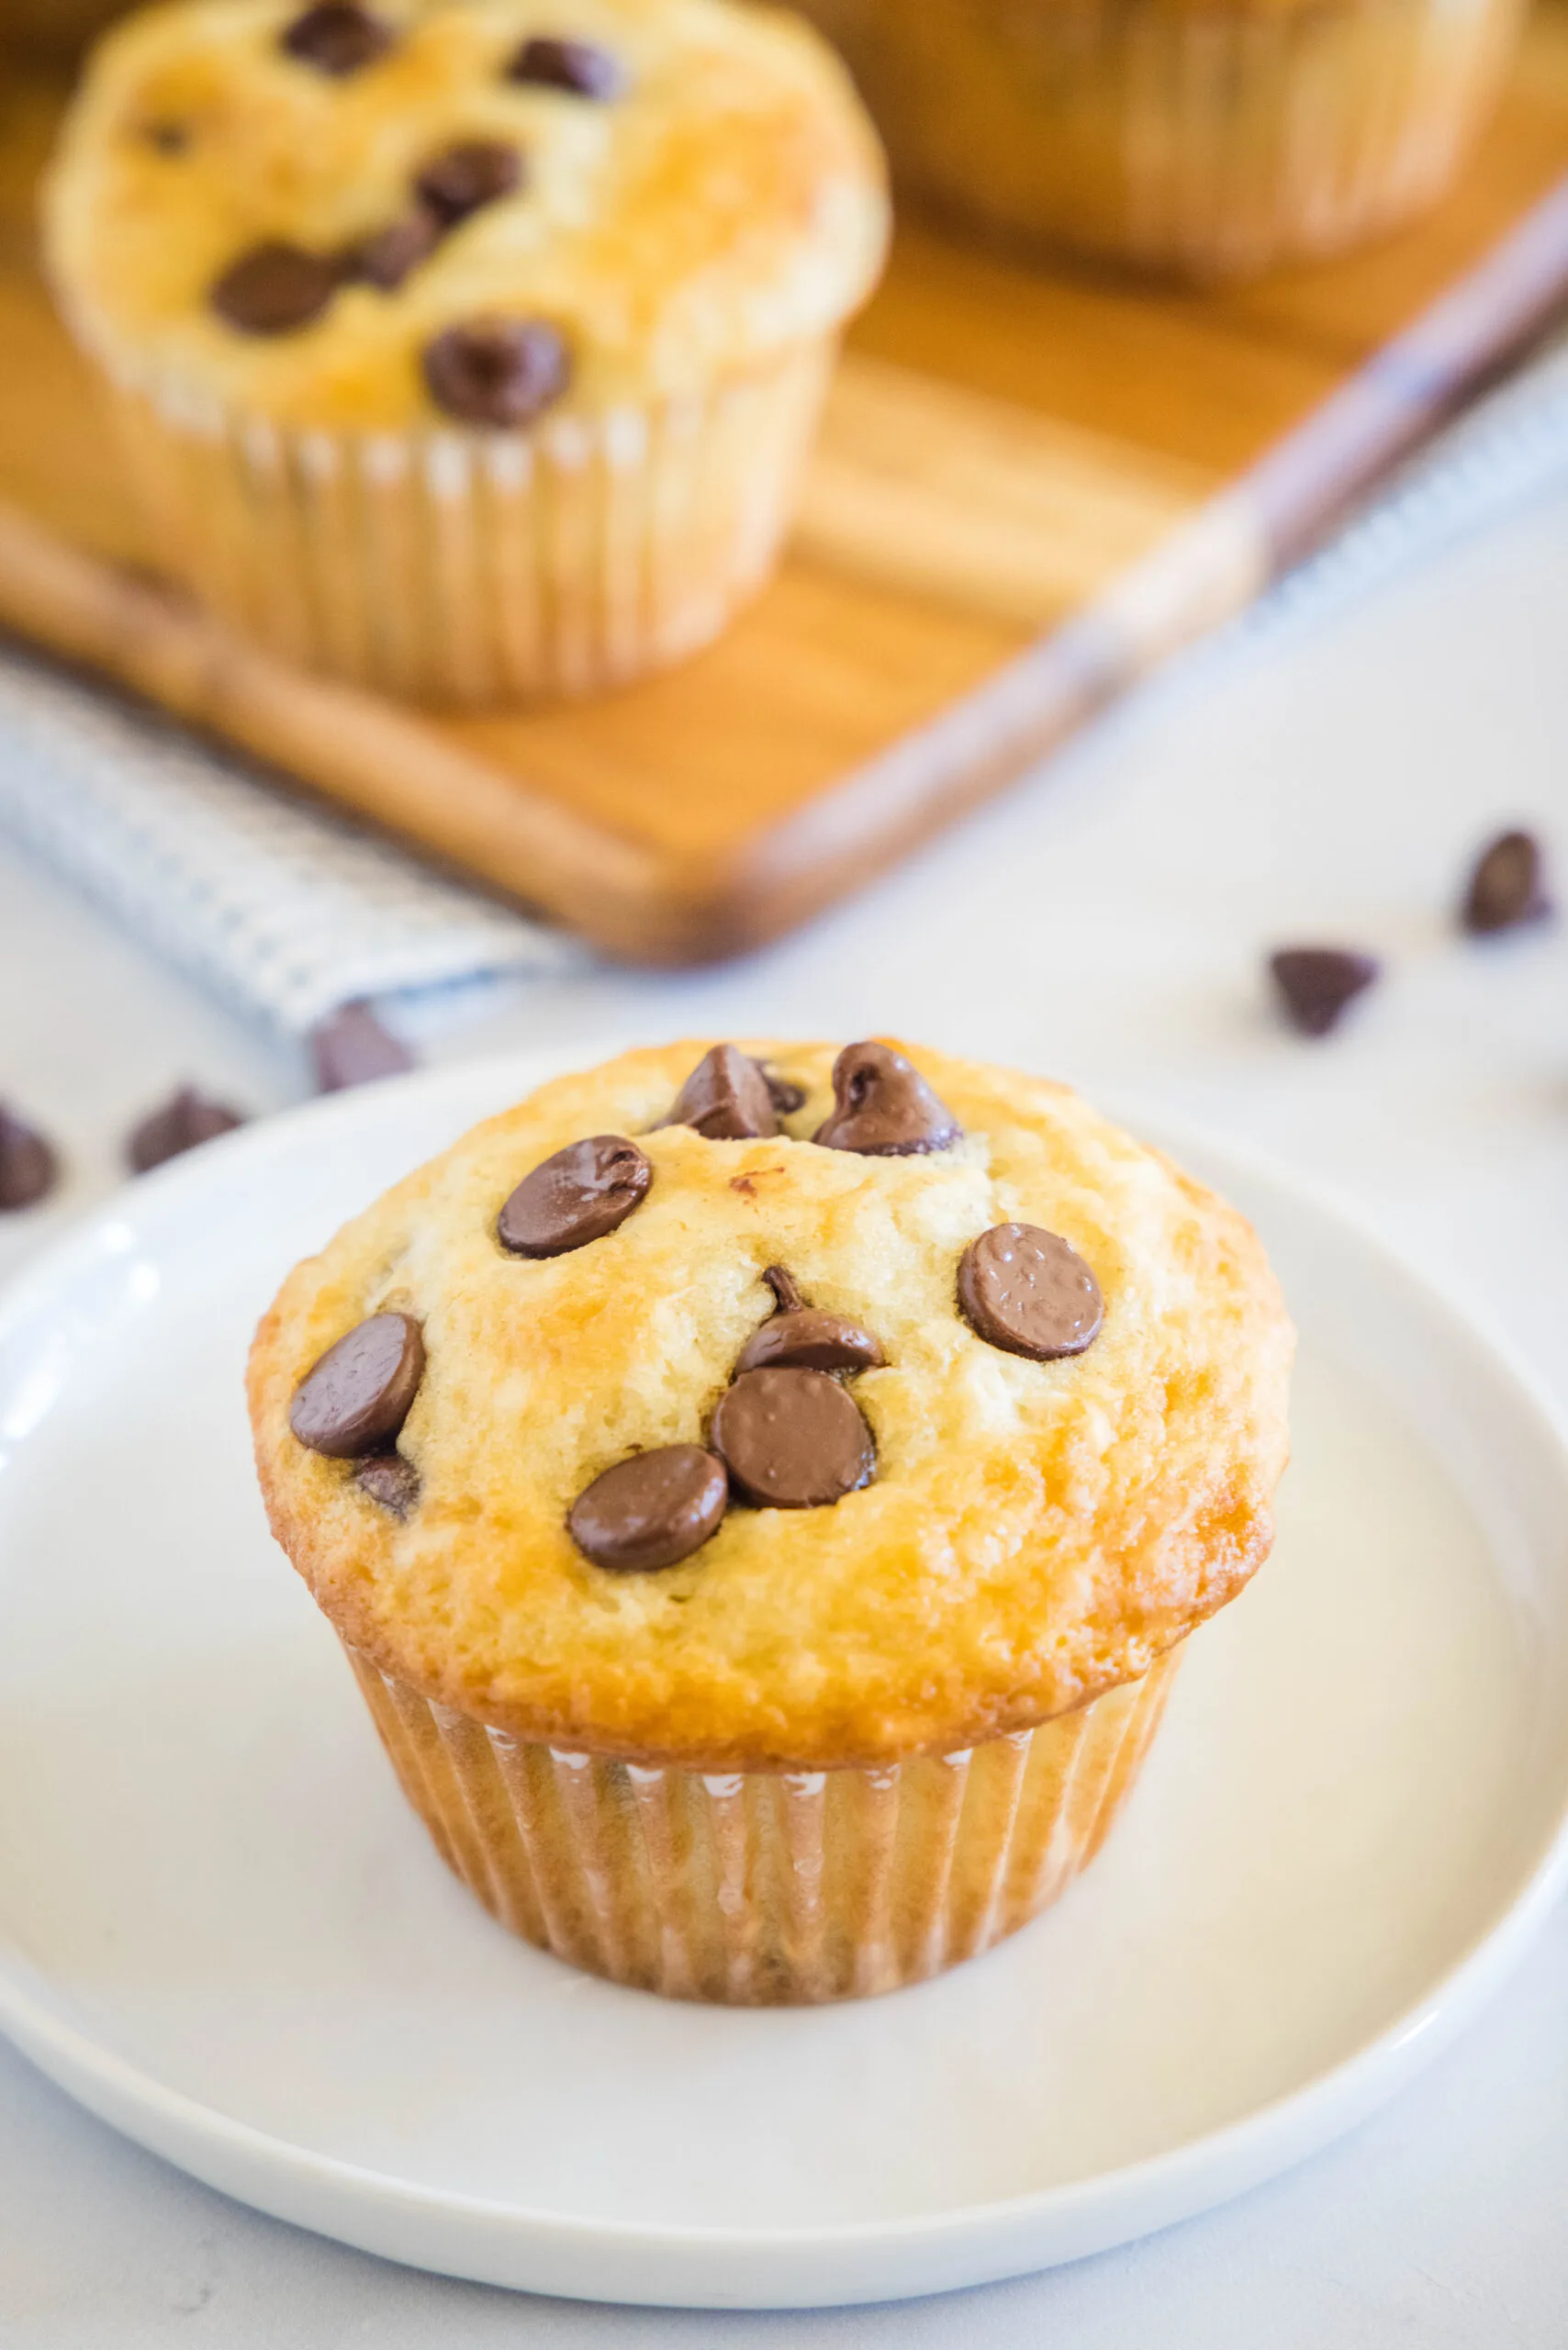 A chocolate chip buttermilk muffin on a white plate with more muffins in the background.